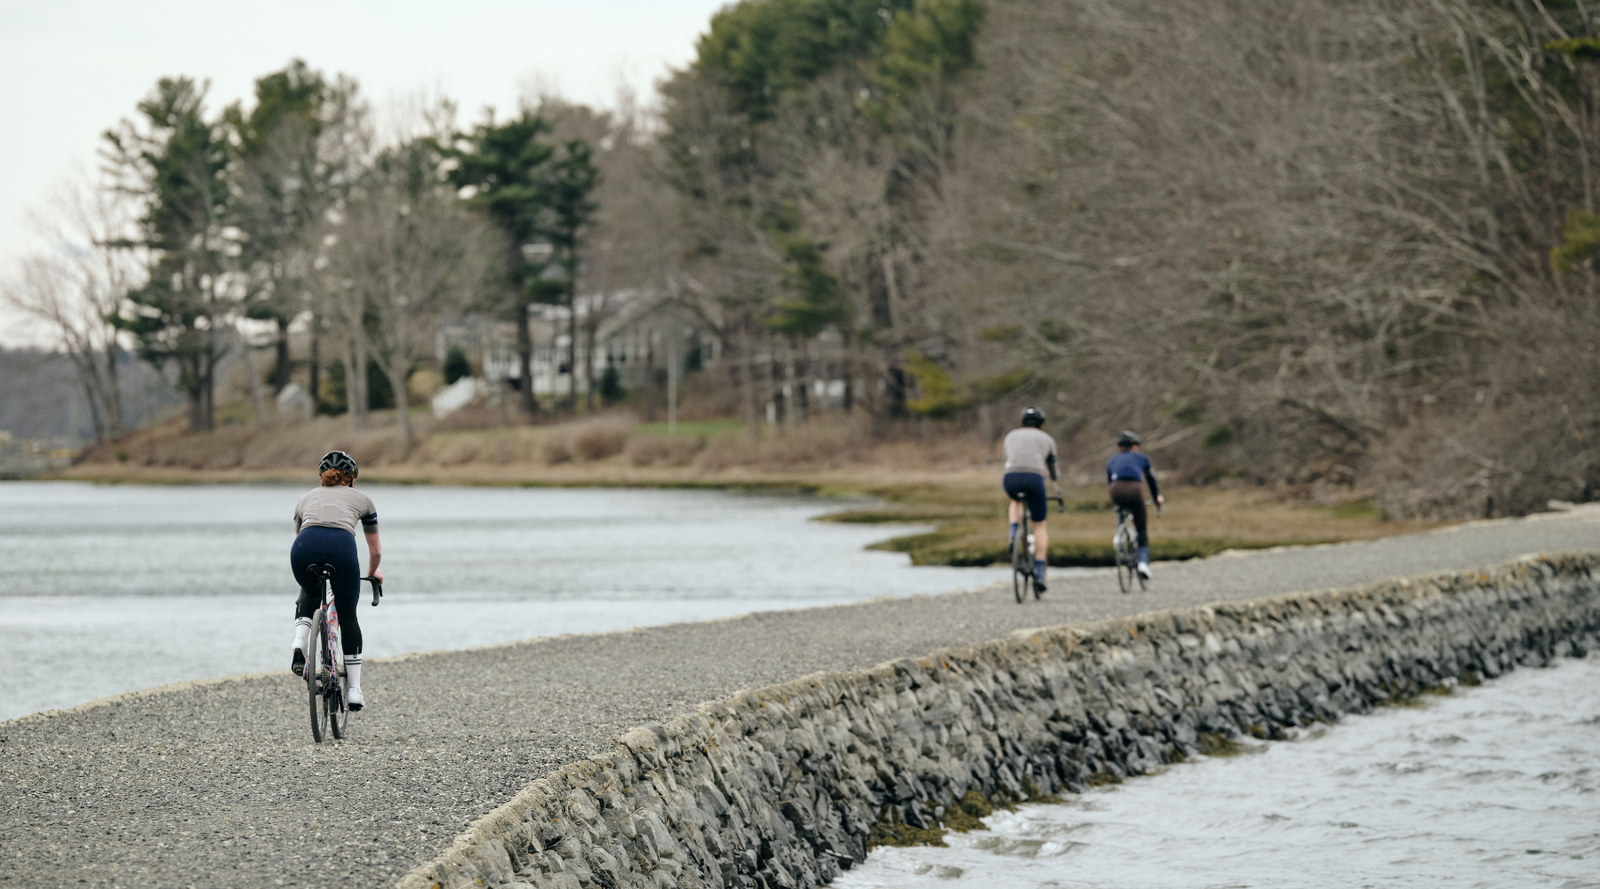 Three cyclists riding away from the camera on a gravel path between two bodies of water.